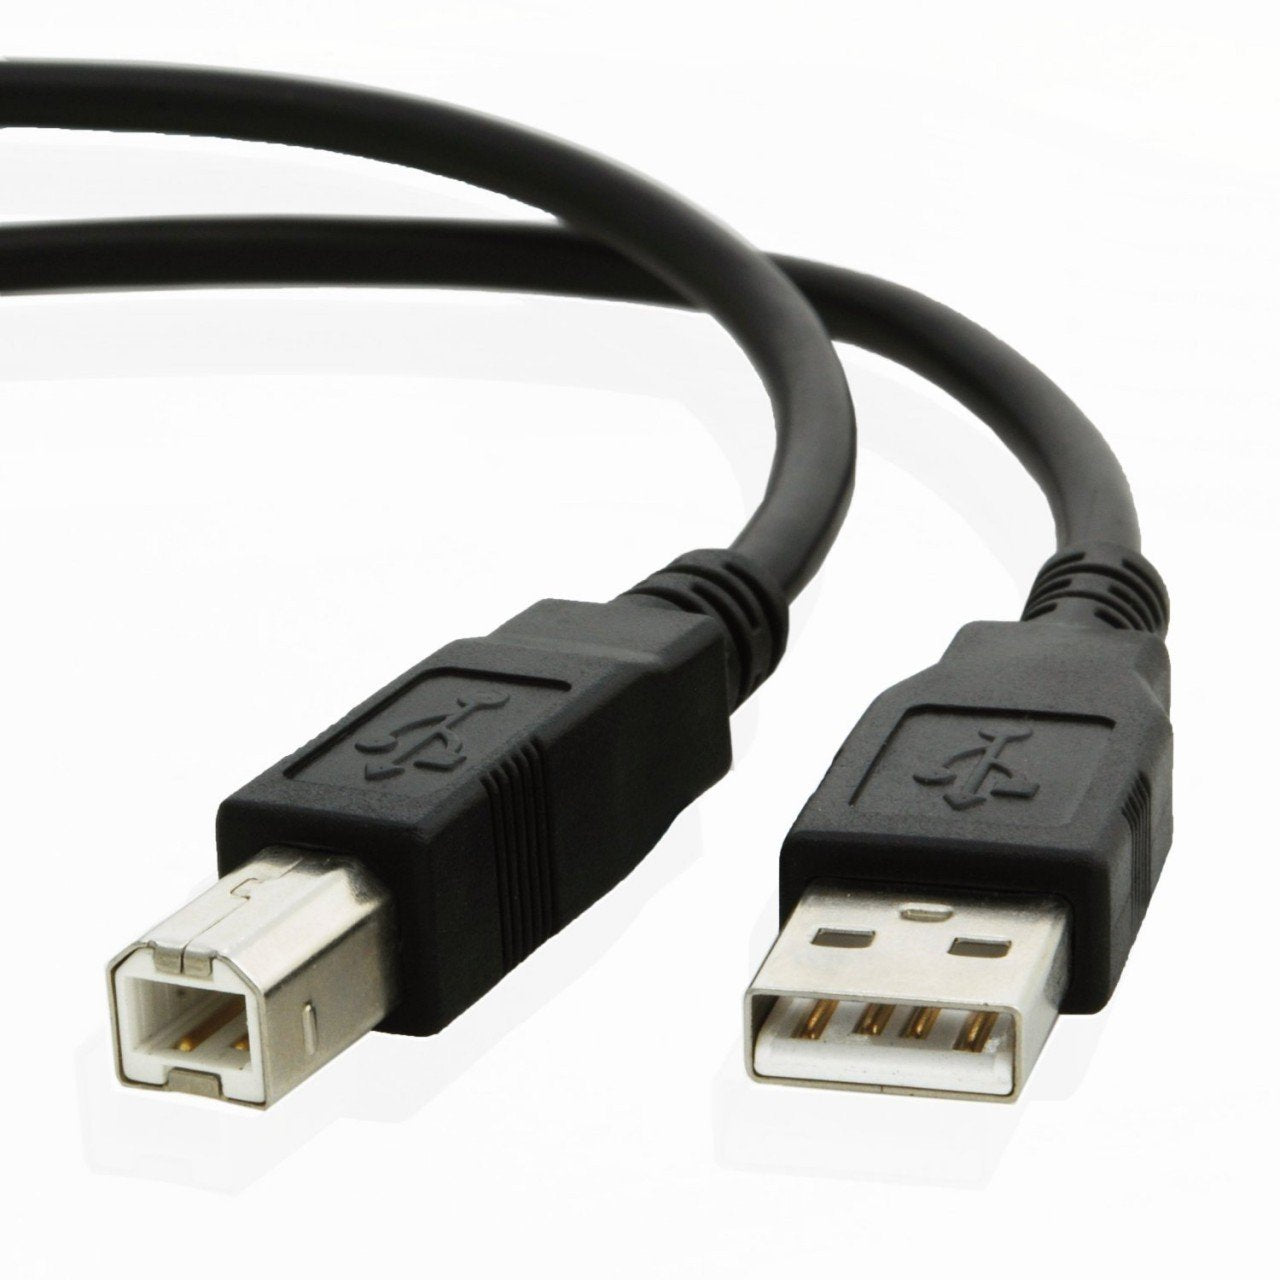 USB cable for Epson DS-575W